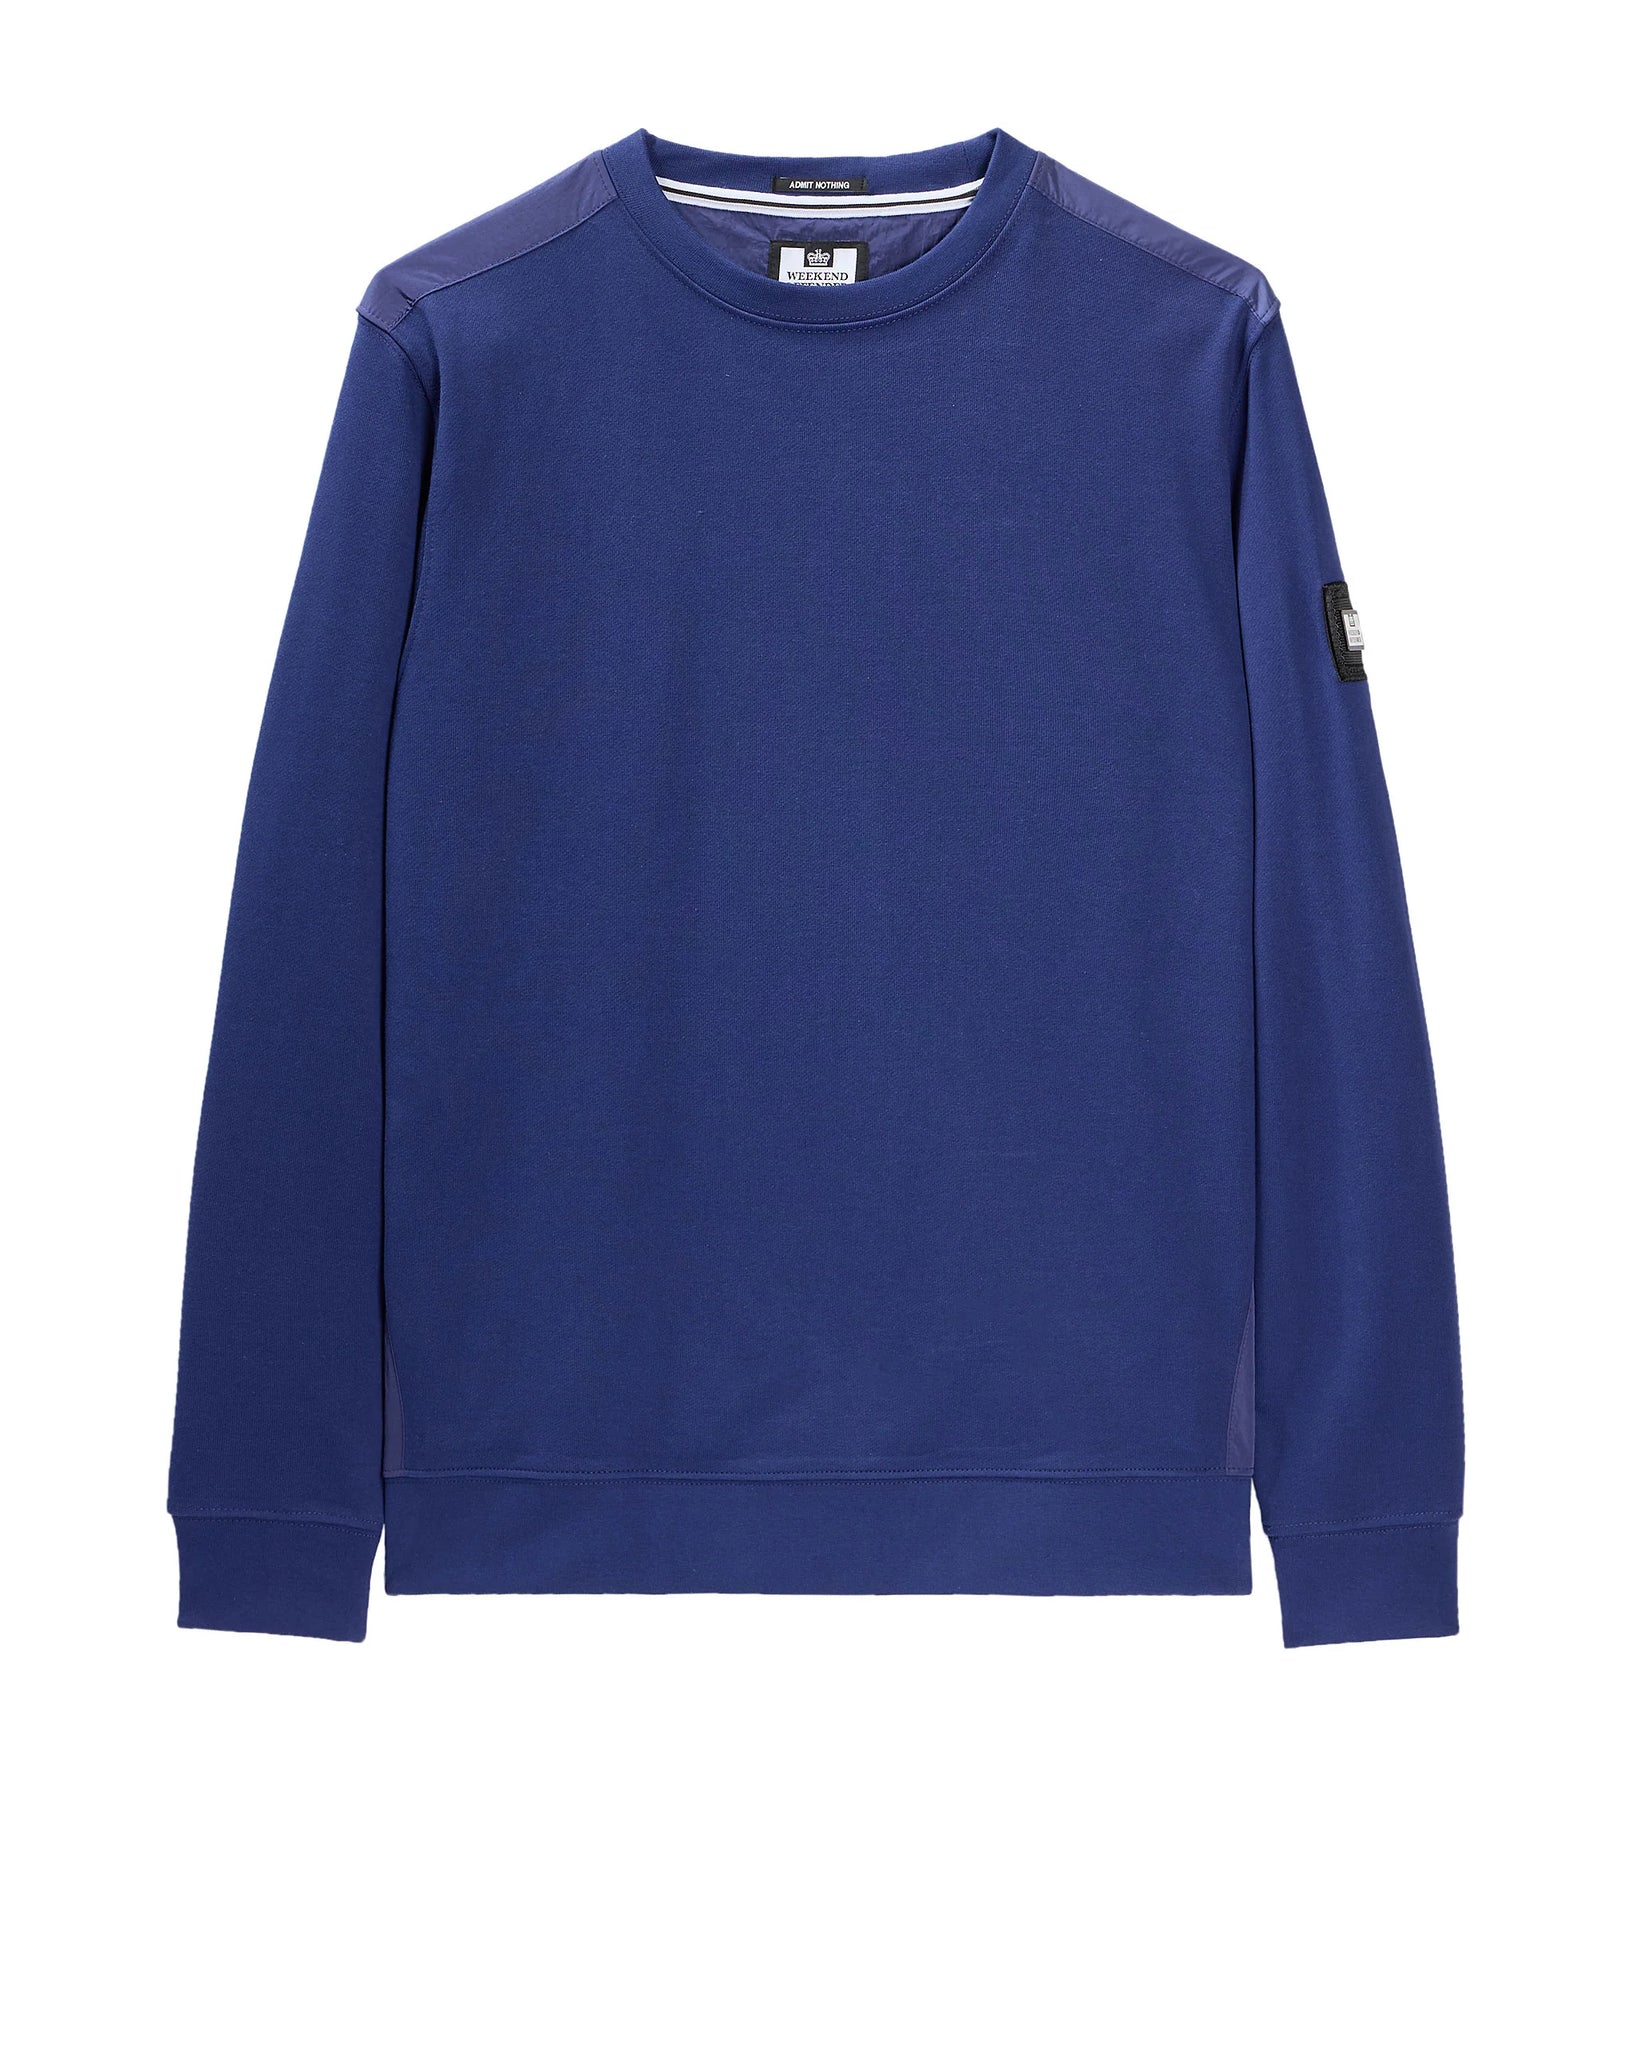 Weekend Offender F Bomb Sweat Bright Navy